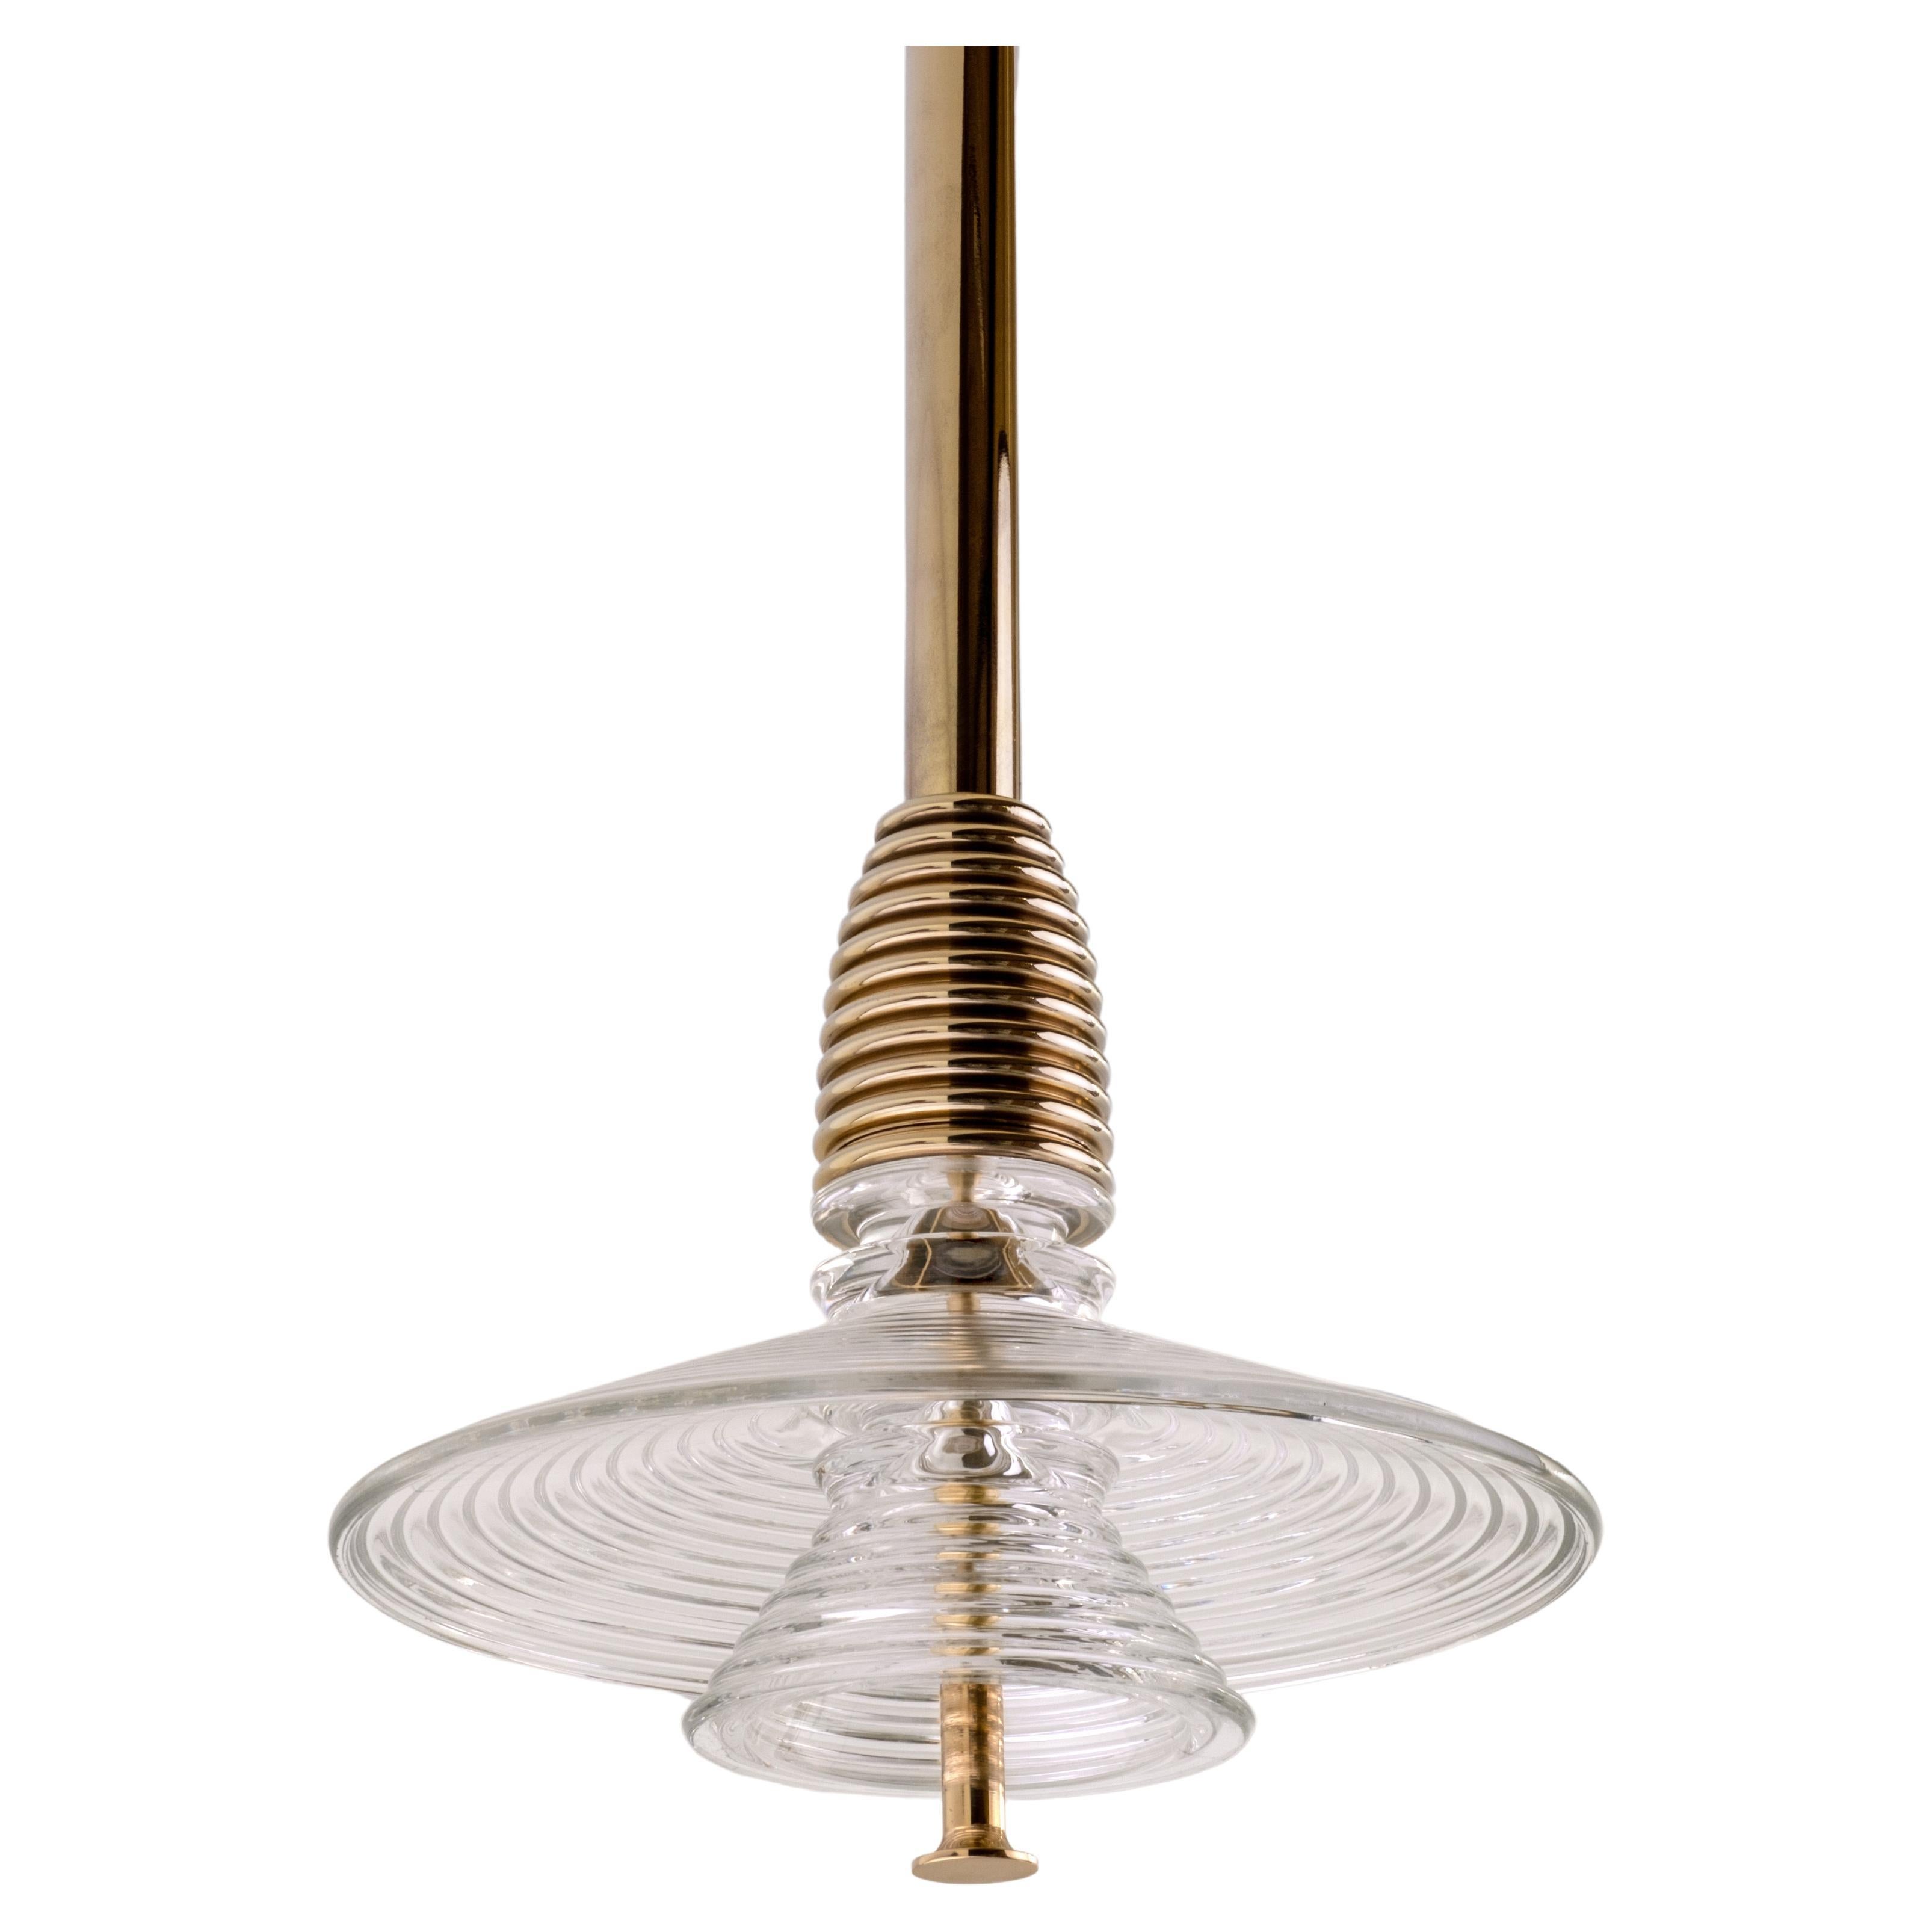 The Insulator 'AB' Pendant in polished brass and clear glass by NOVOCASTRIAN